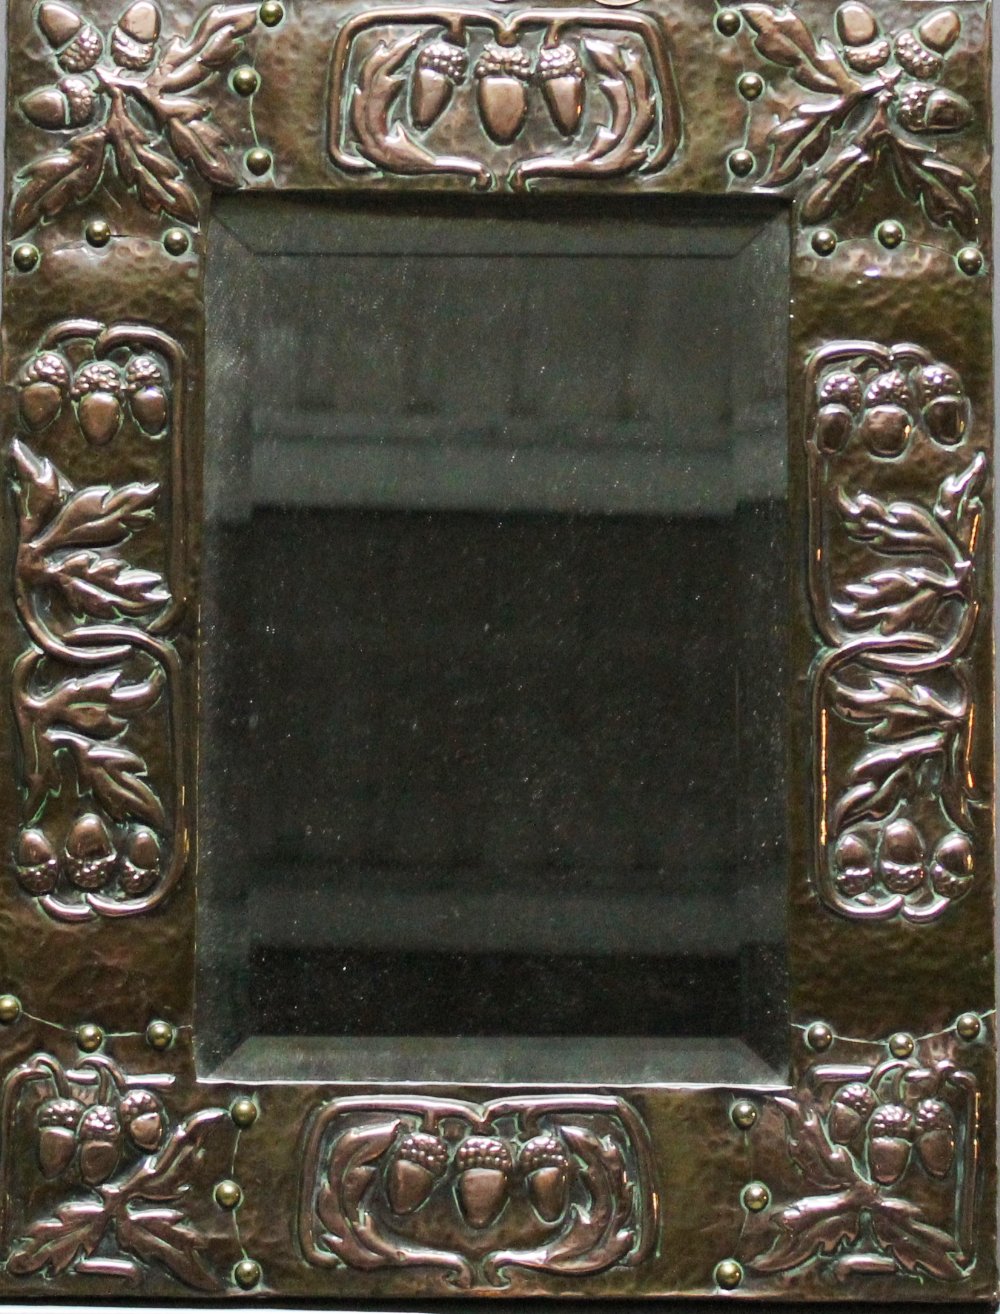 AN ARTS AND CRAFTS COPPER FRAMED MIRROR having a bevelled rectangular plate in a hand-beaten and